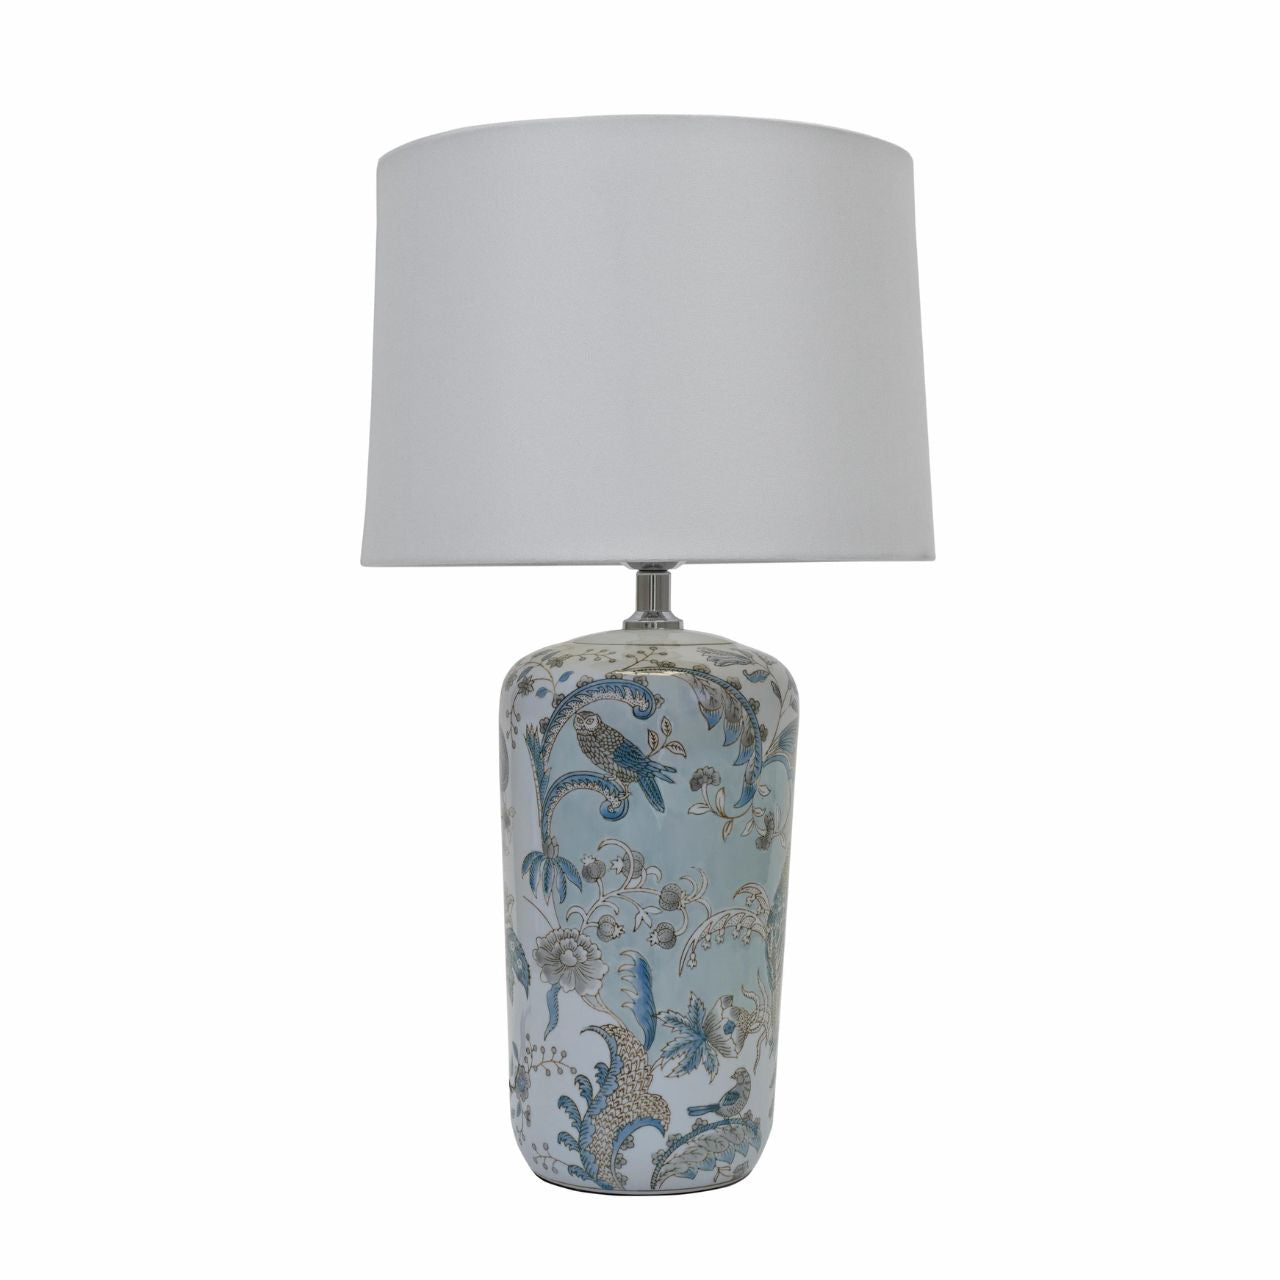 Mindy Brownes Delia Lamp Large  Good lighting is essential for every home. Our ceramic collection is traditional yet timeless and featuring stunning designs, prints and patterns bursting with colour. This lamp is blue in detail with tropical print. White linen shade.